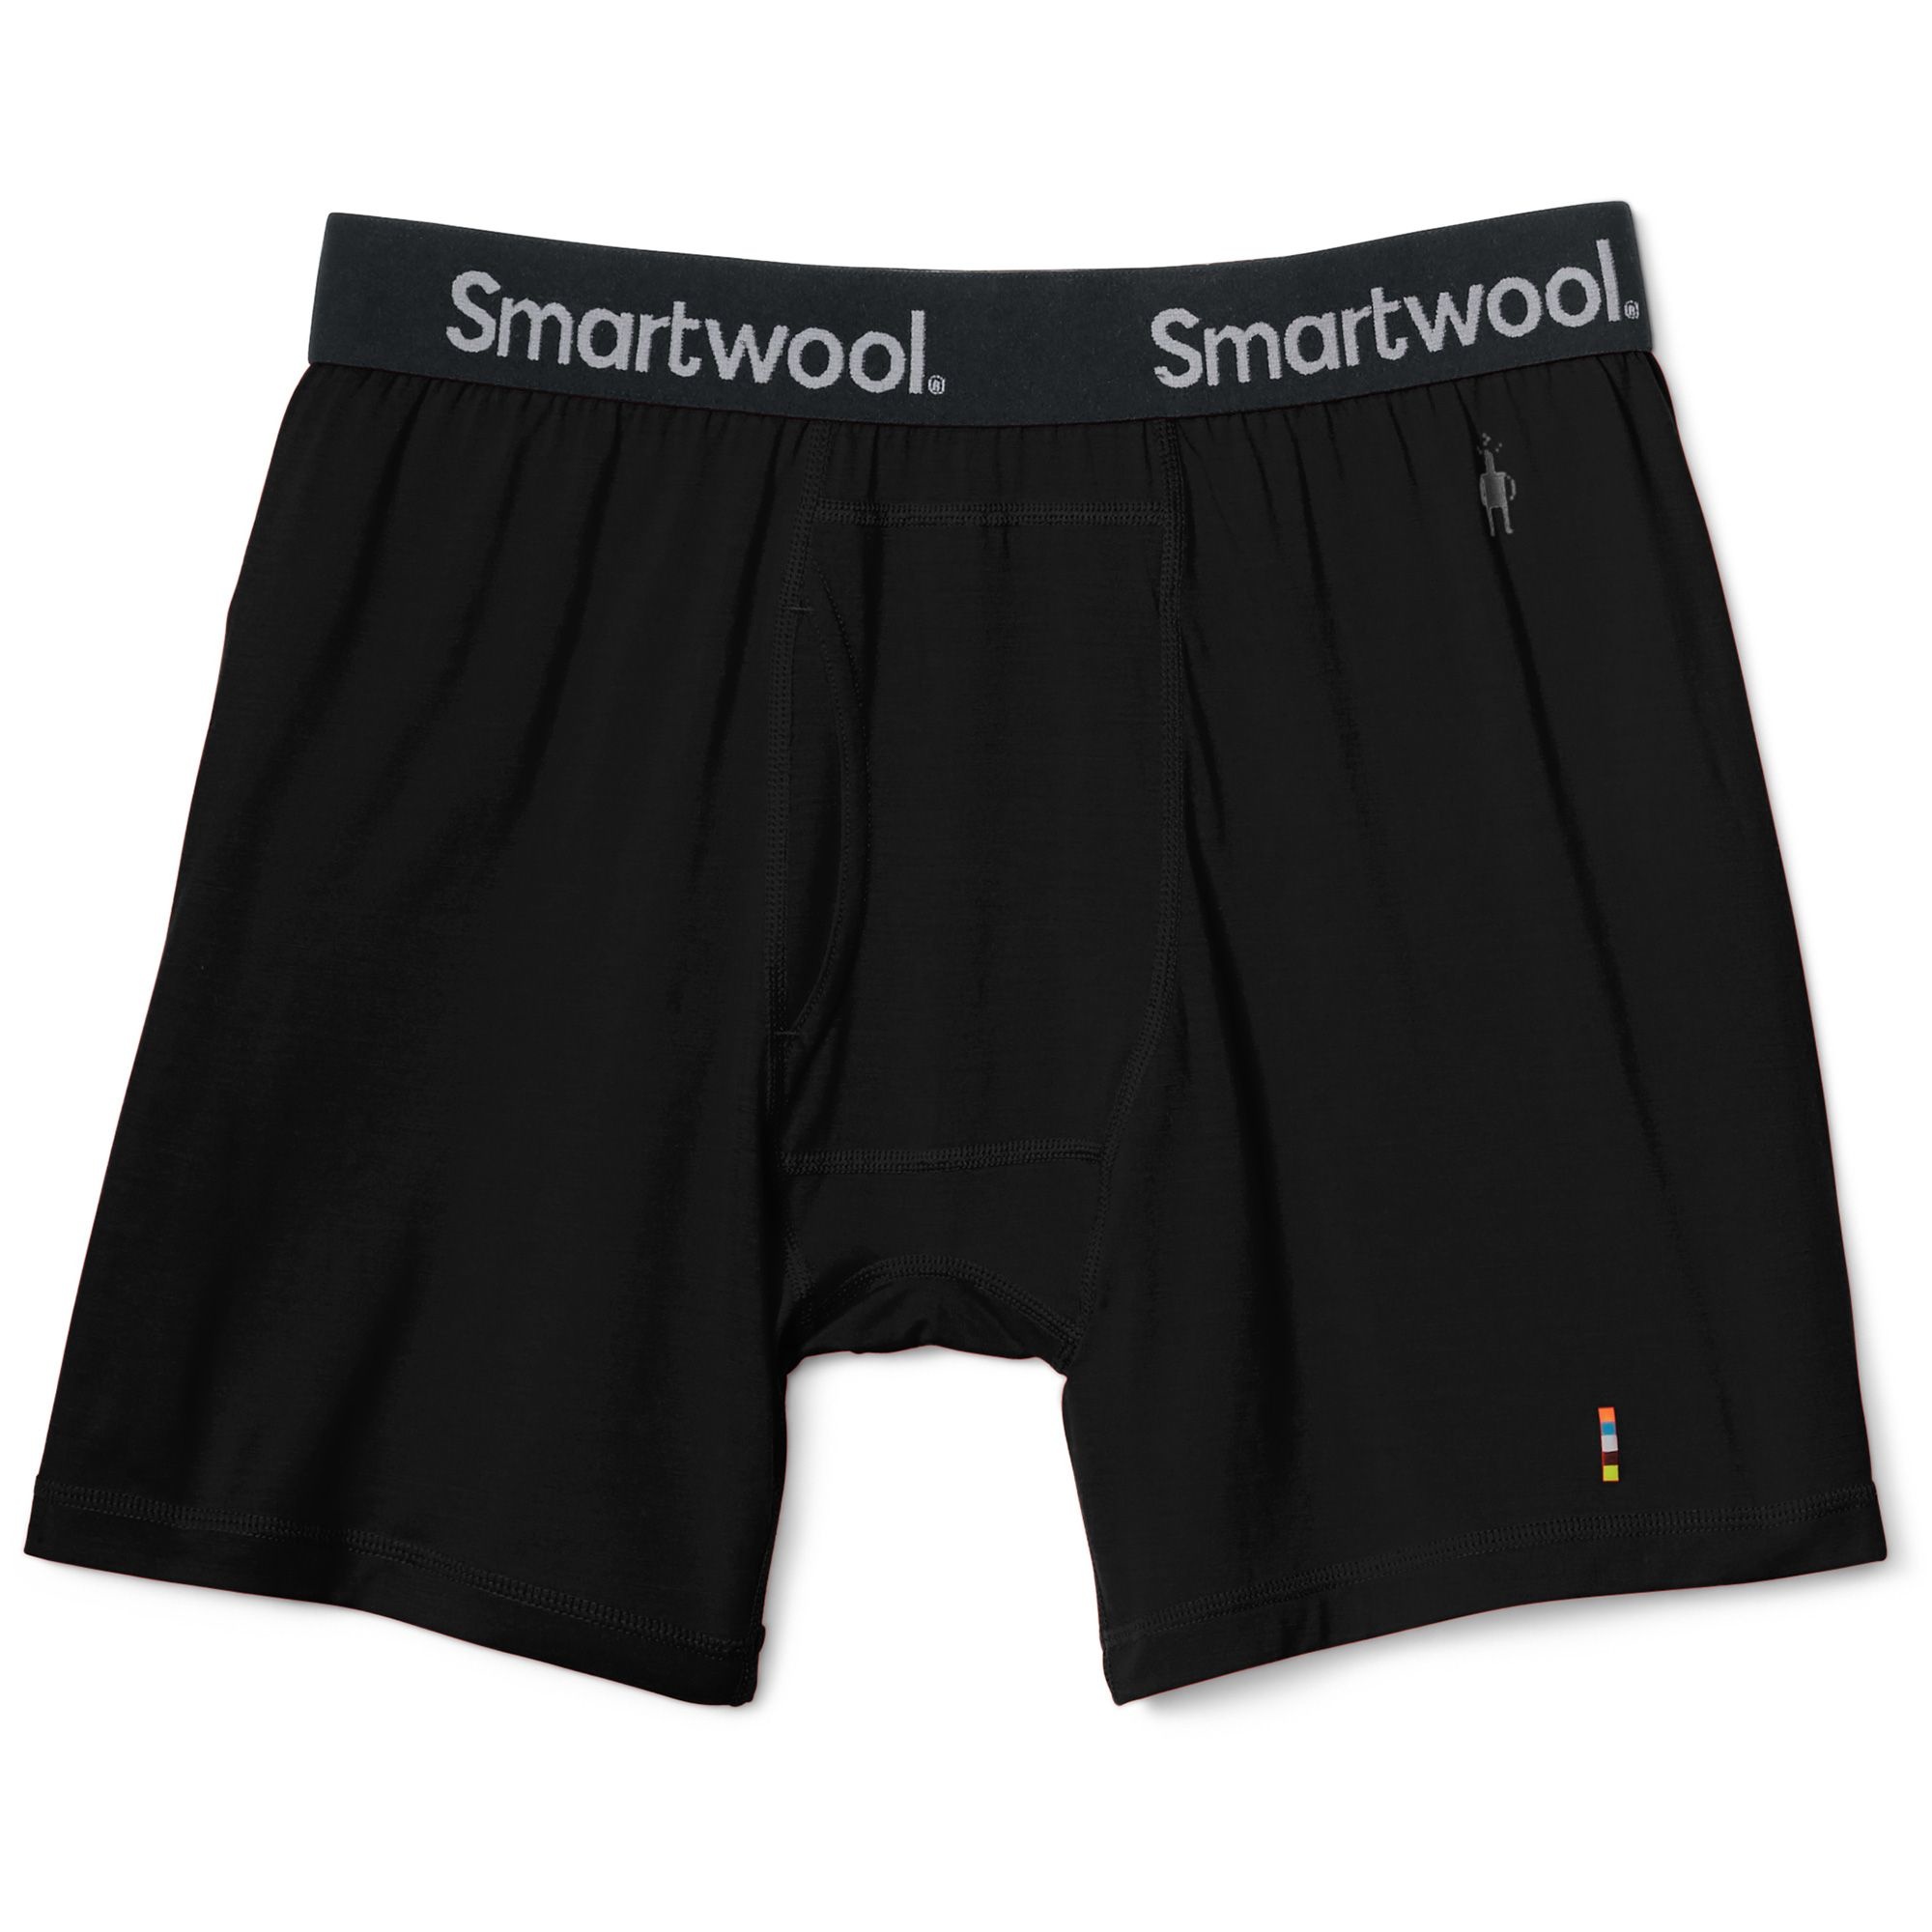 Smartwool Merino Sport 150 Boxer Brief • Wanderlust Outfitters™